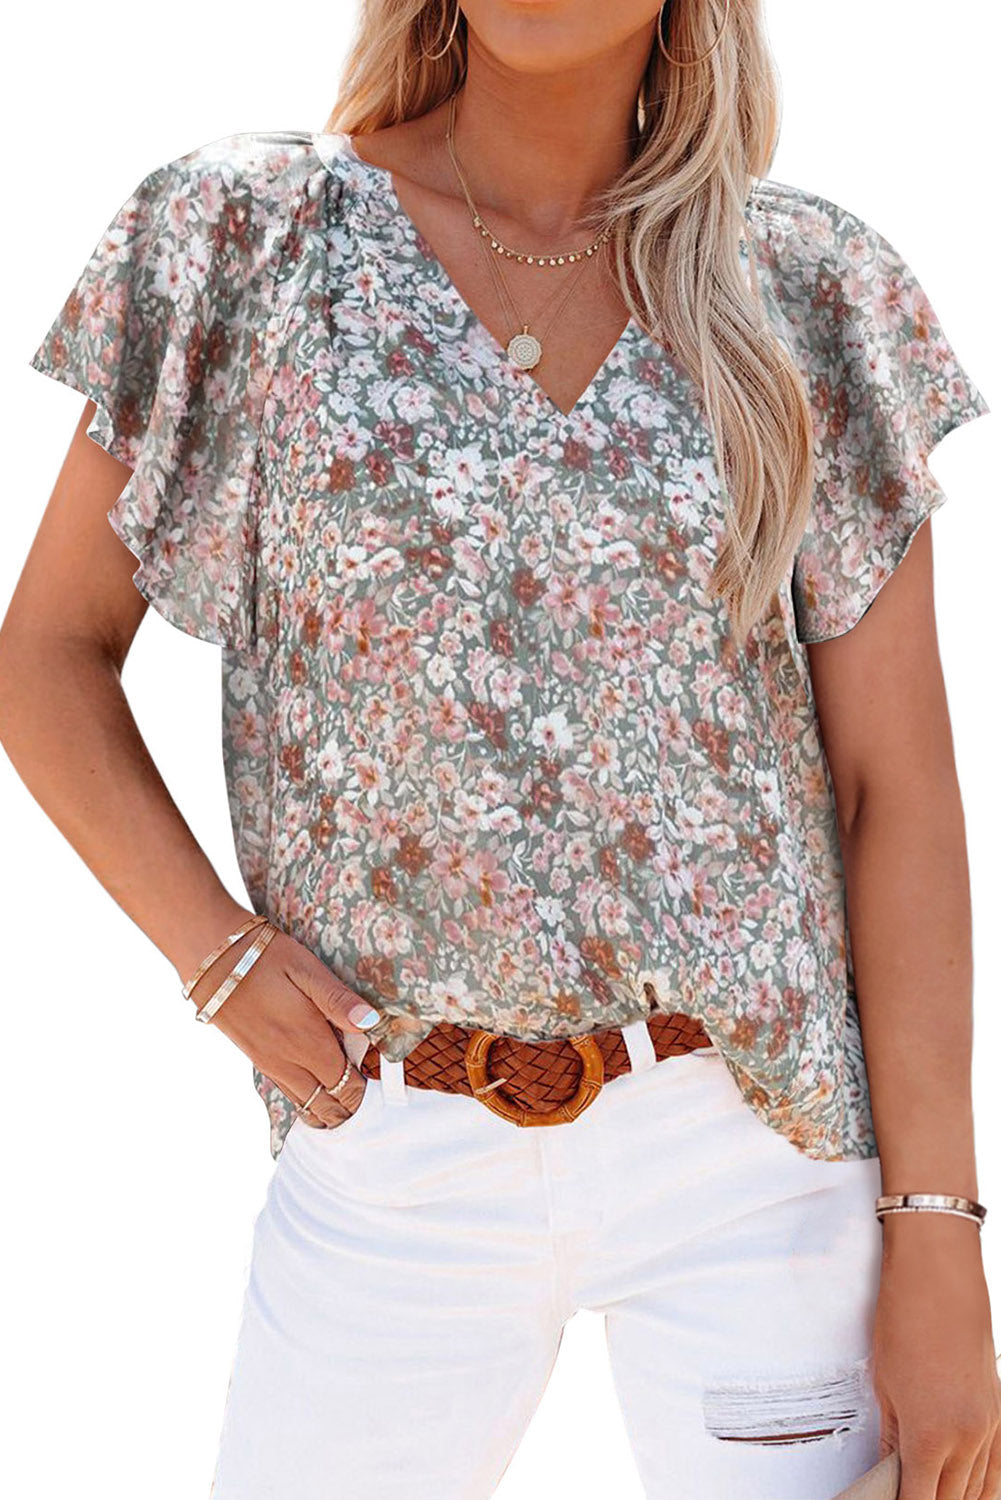 Summer Floral Smocked Blouse Women's Boho Tops – PinkQueenShop